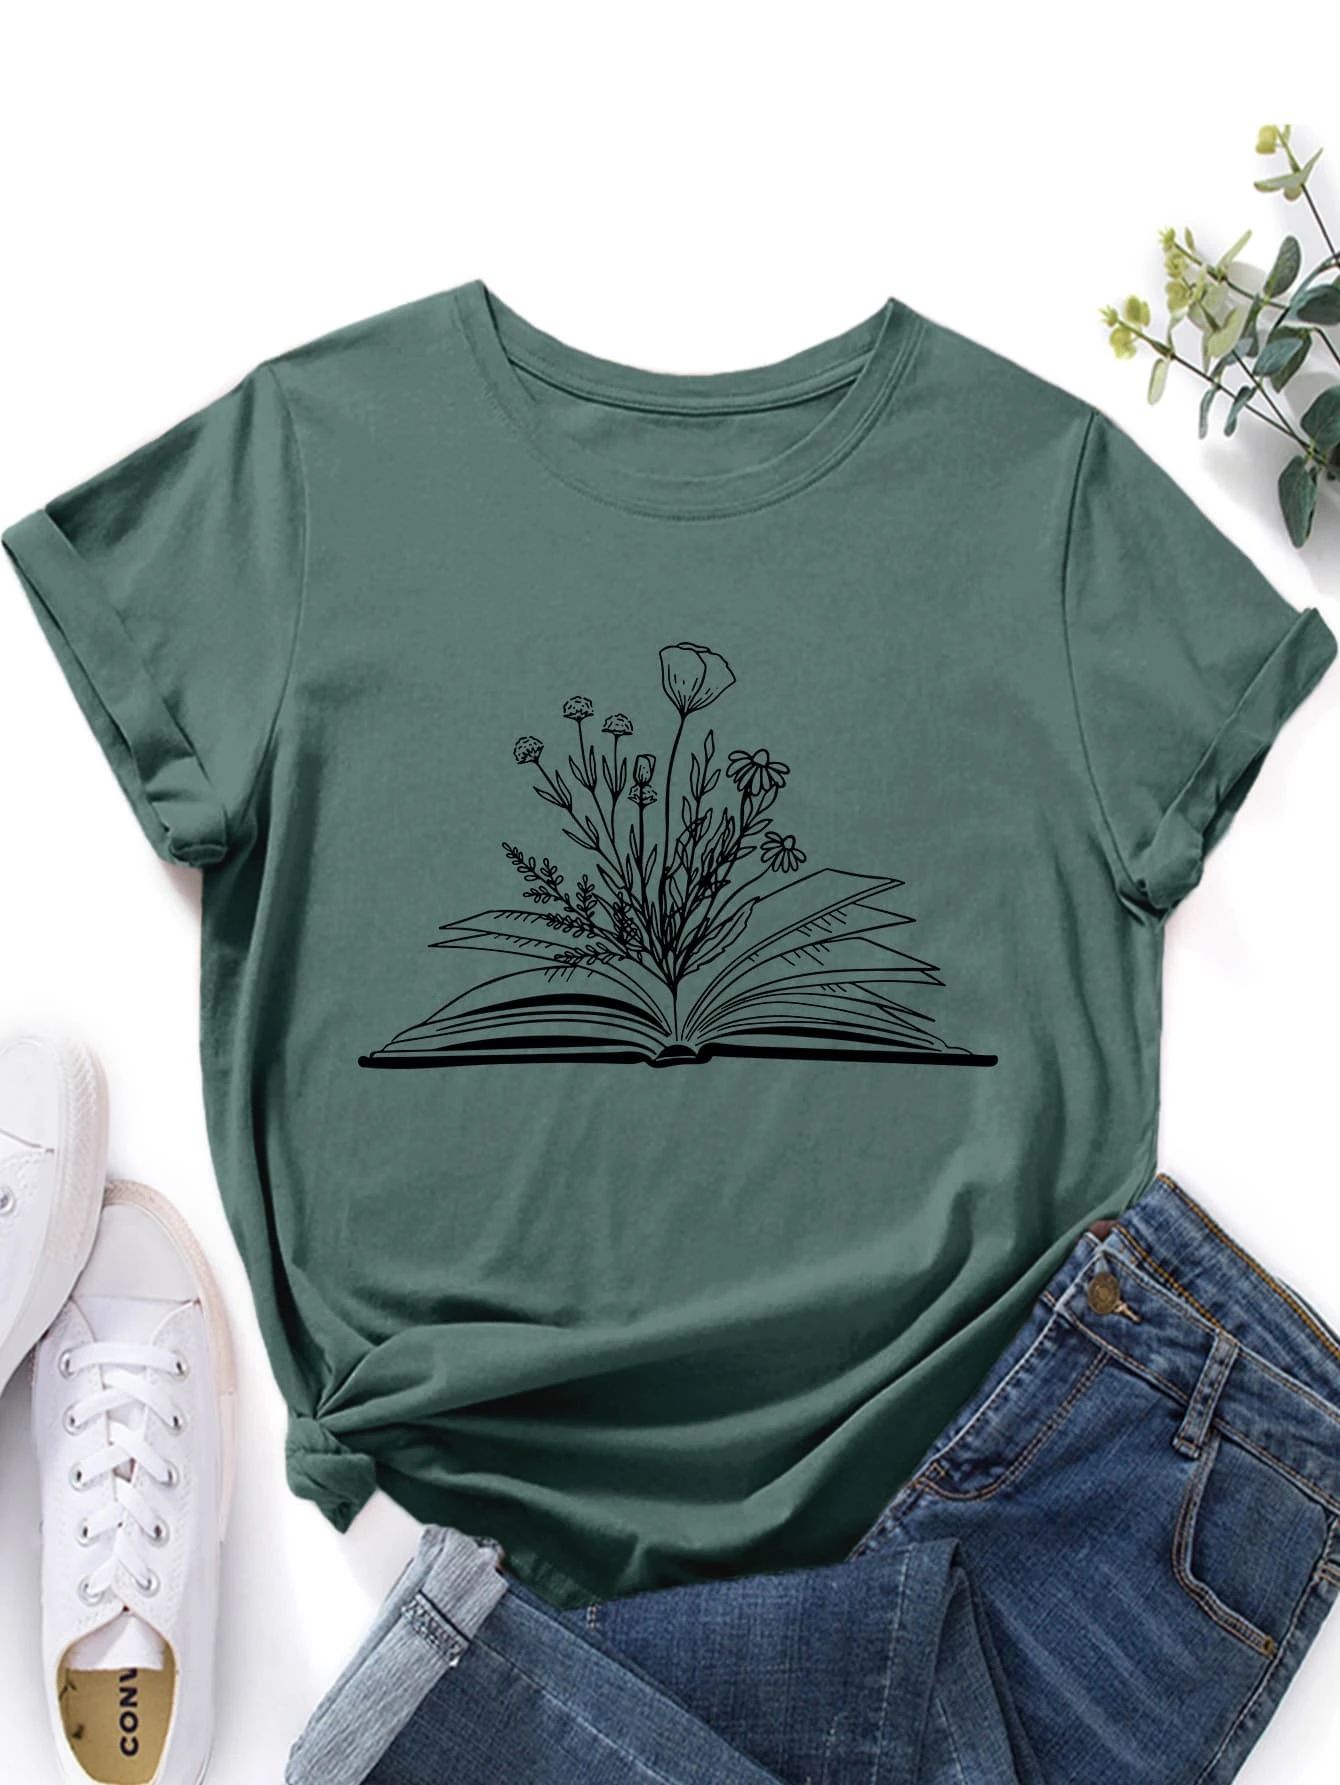 SHEIN LUNE Book And Floral Print Tee | SHEIN